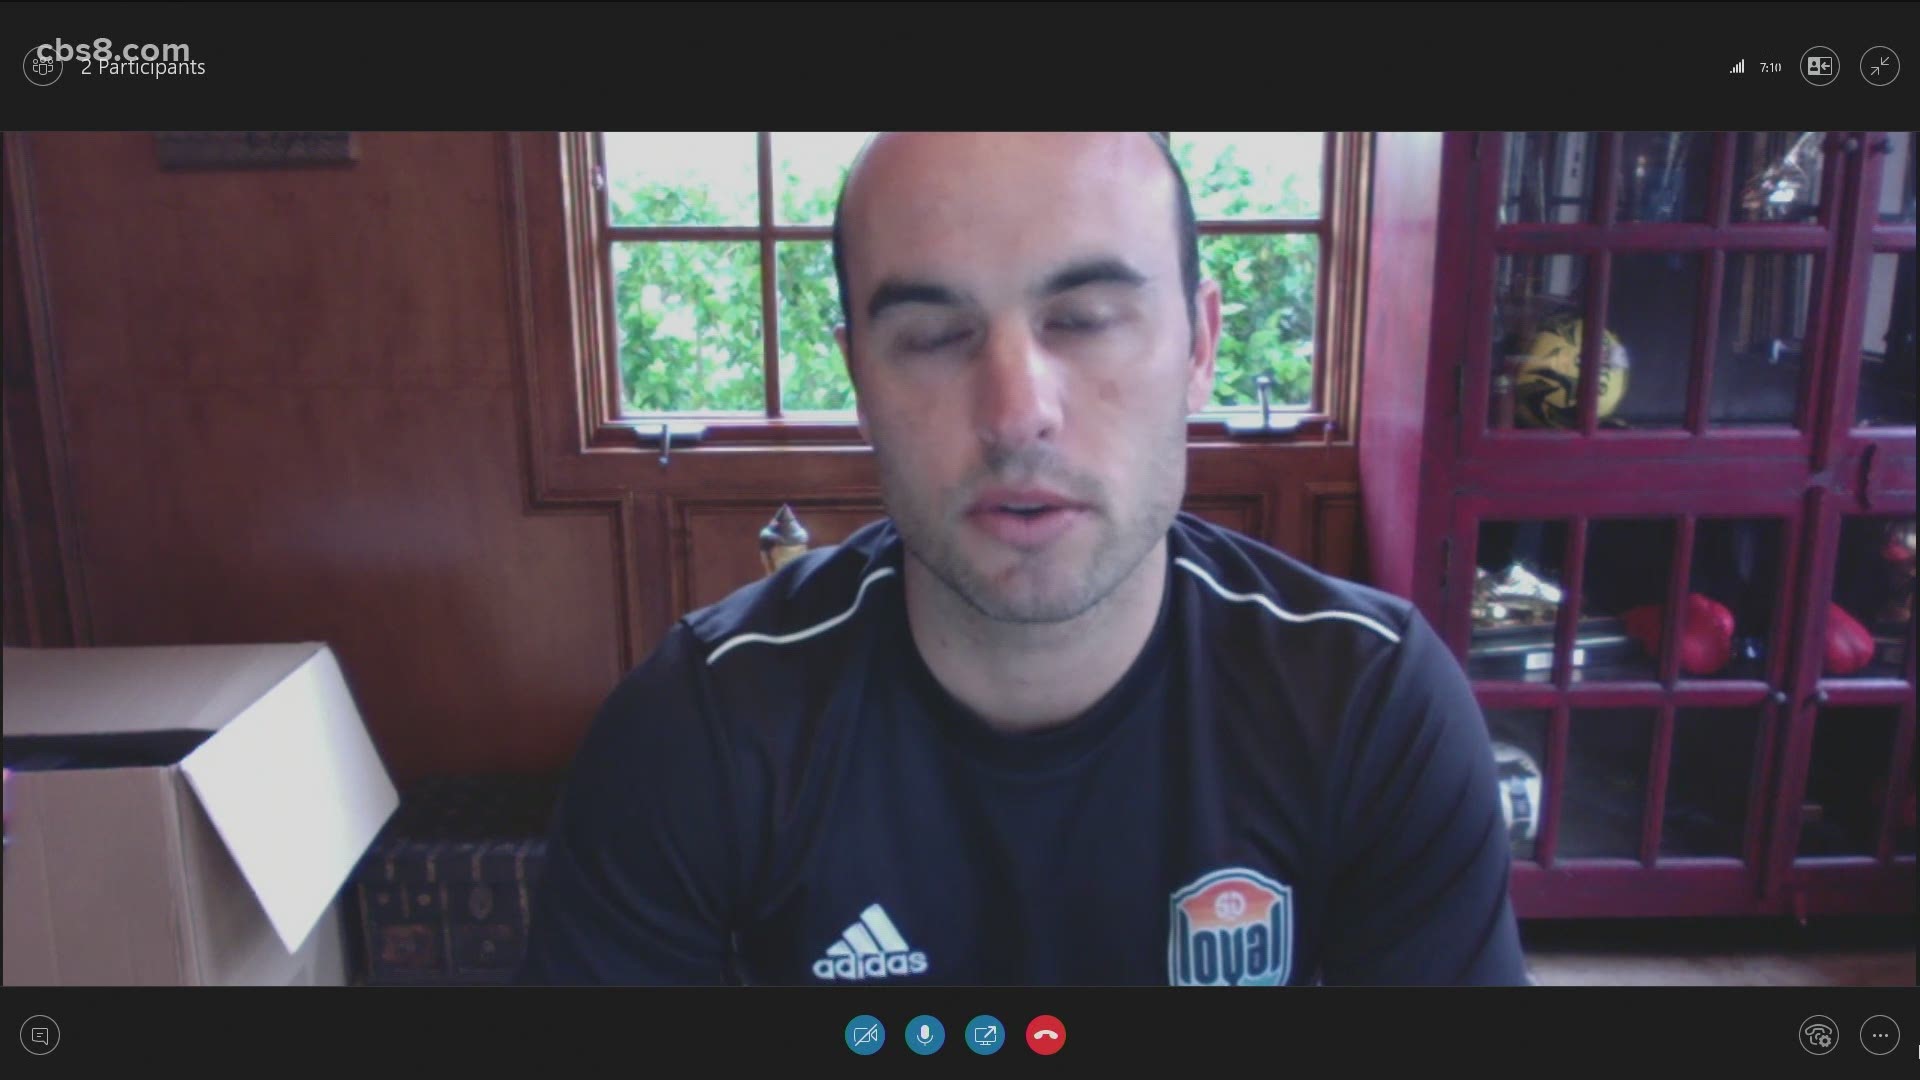 Landon Donovan joined Morning Extra via Skype to explain the competition the team is holding to raise money for Rady Children's Hospital.